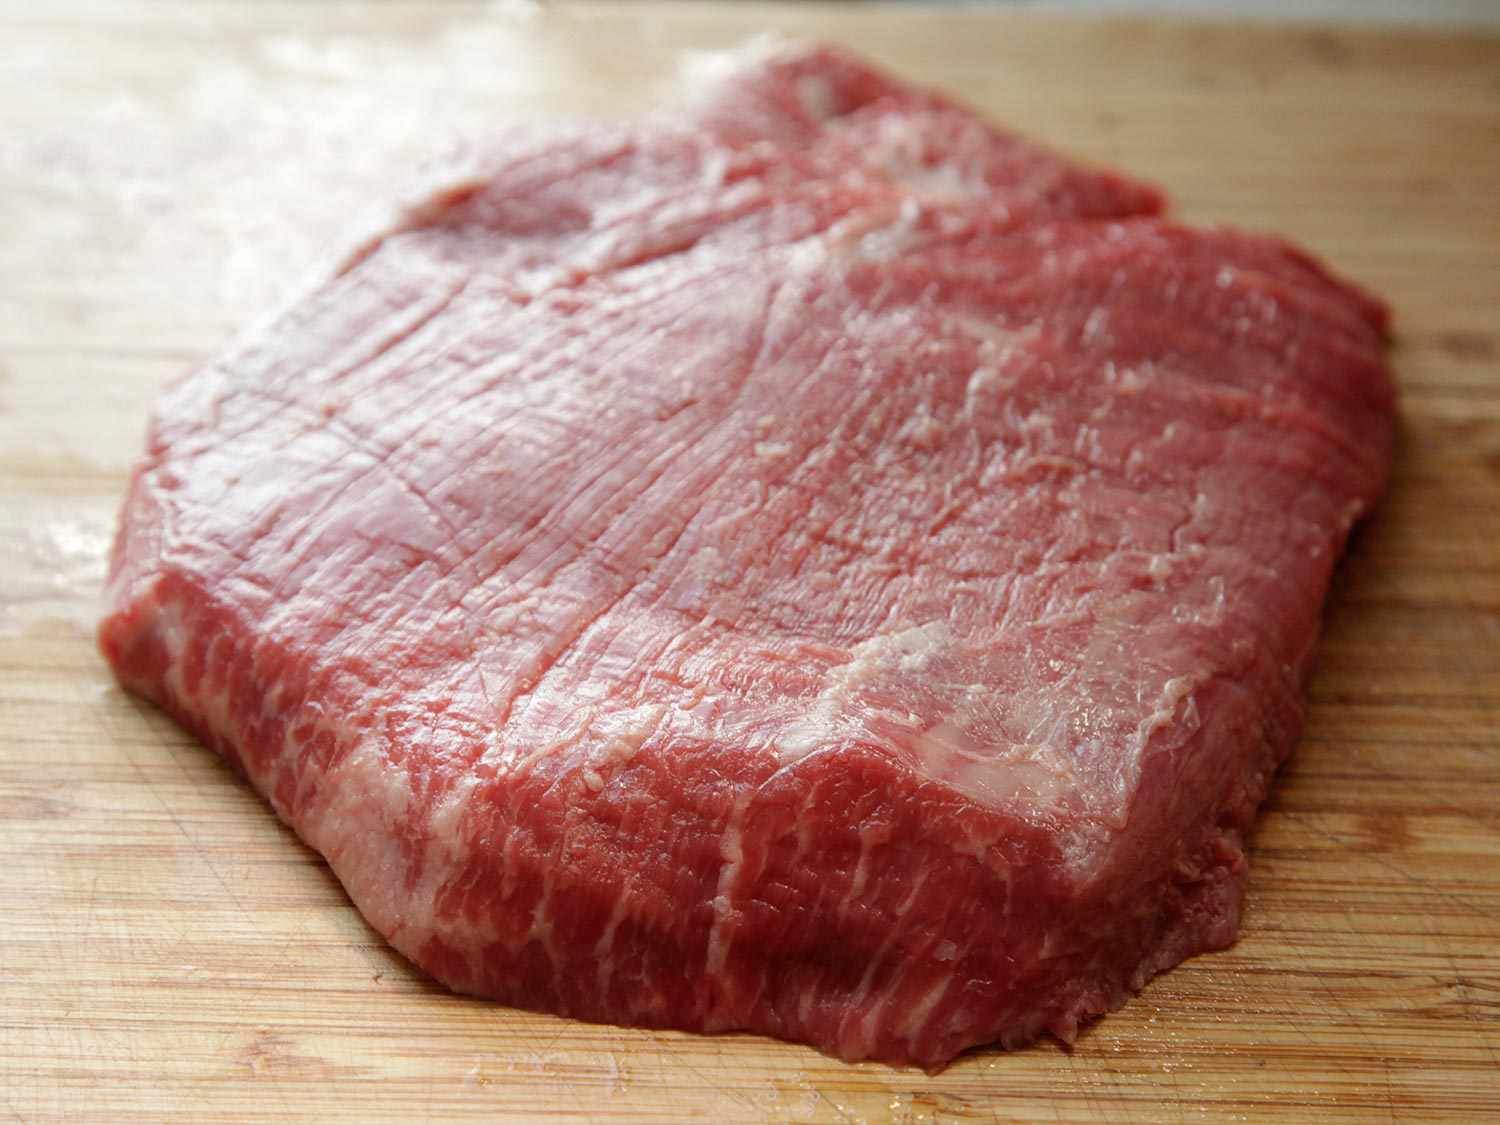 Raw flank steak on a wooden surface